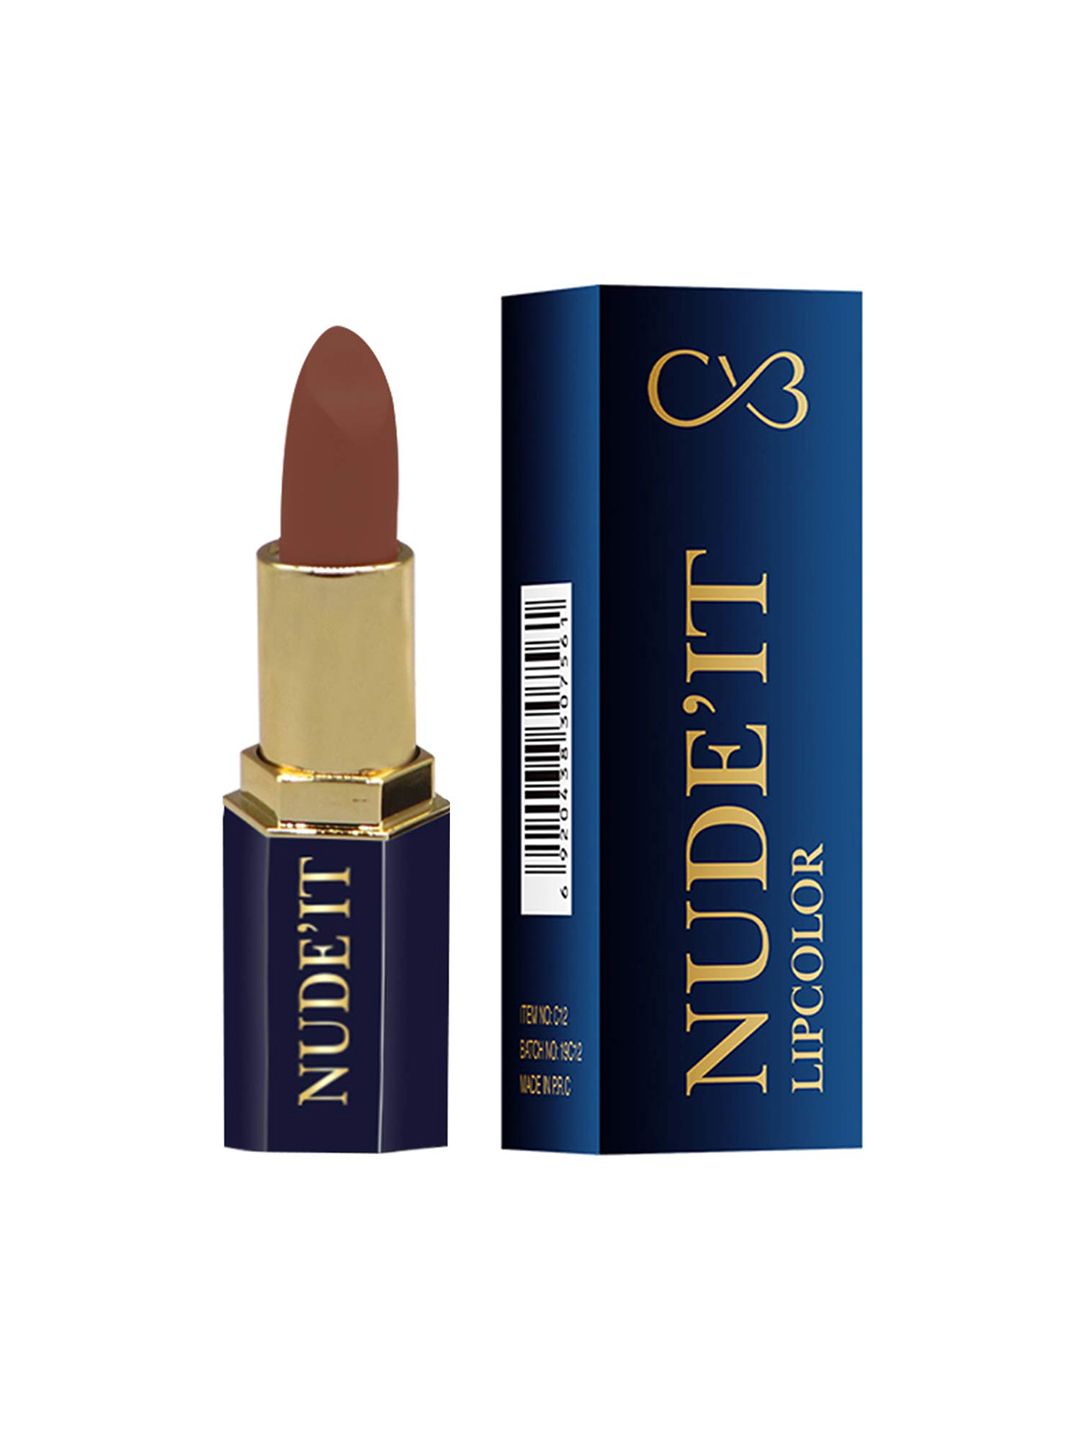 CVB Long-Lasting Coverage Nude It Lipcolor - Dusty 203 Price in India